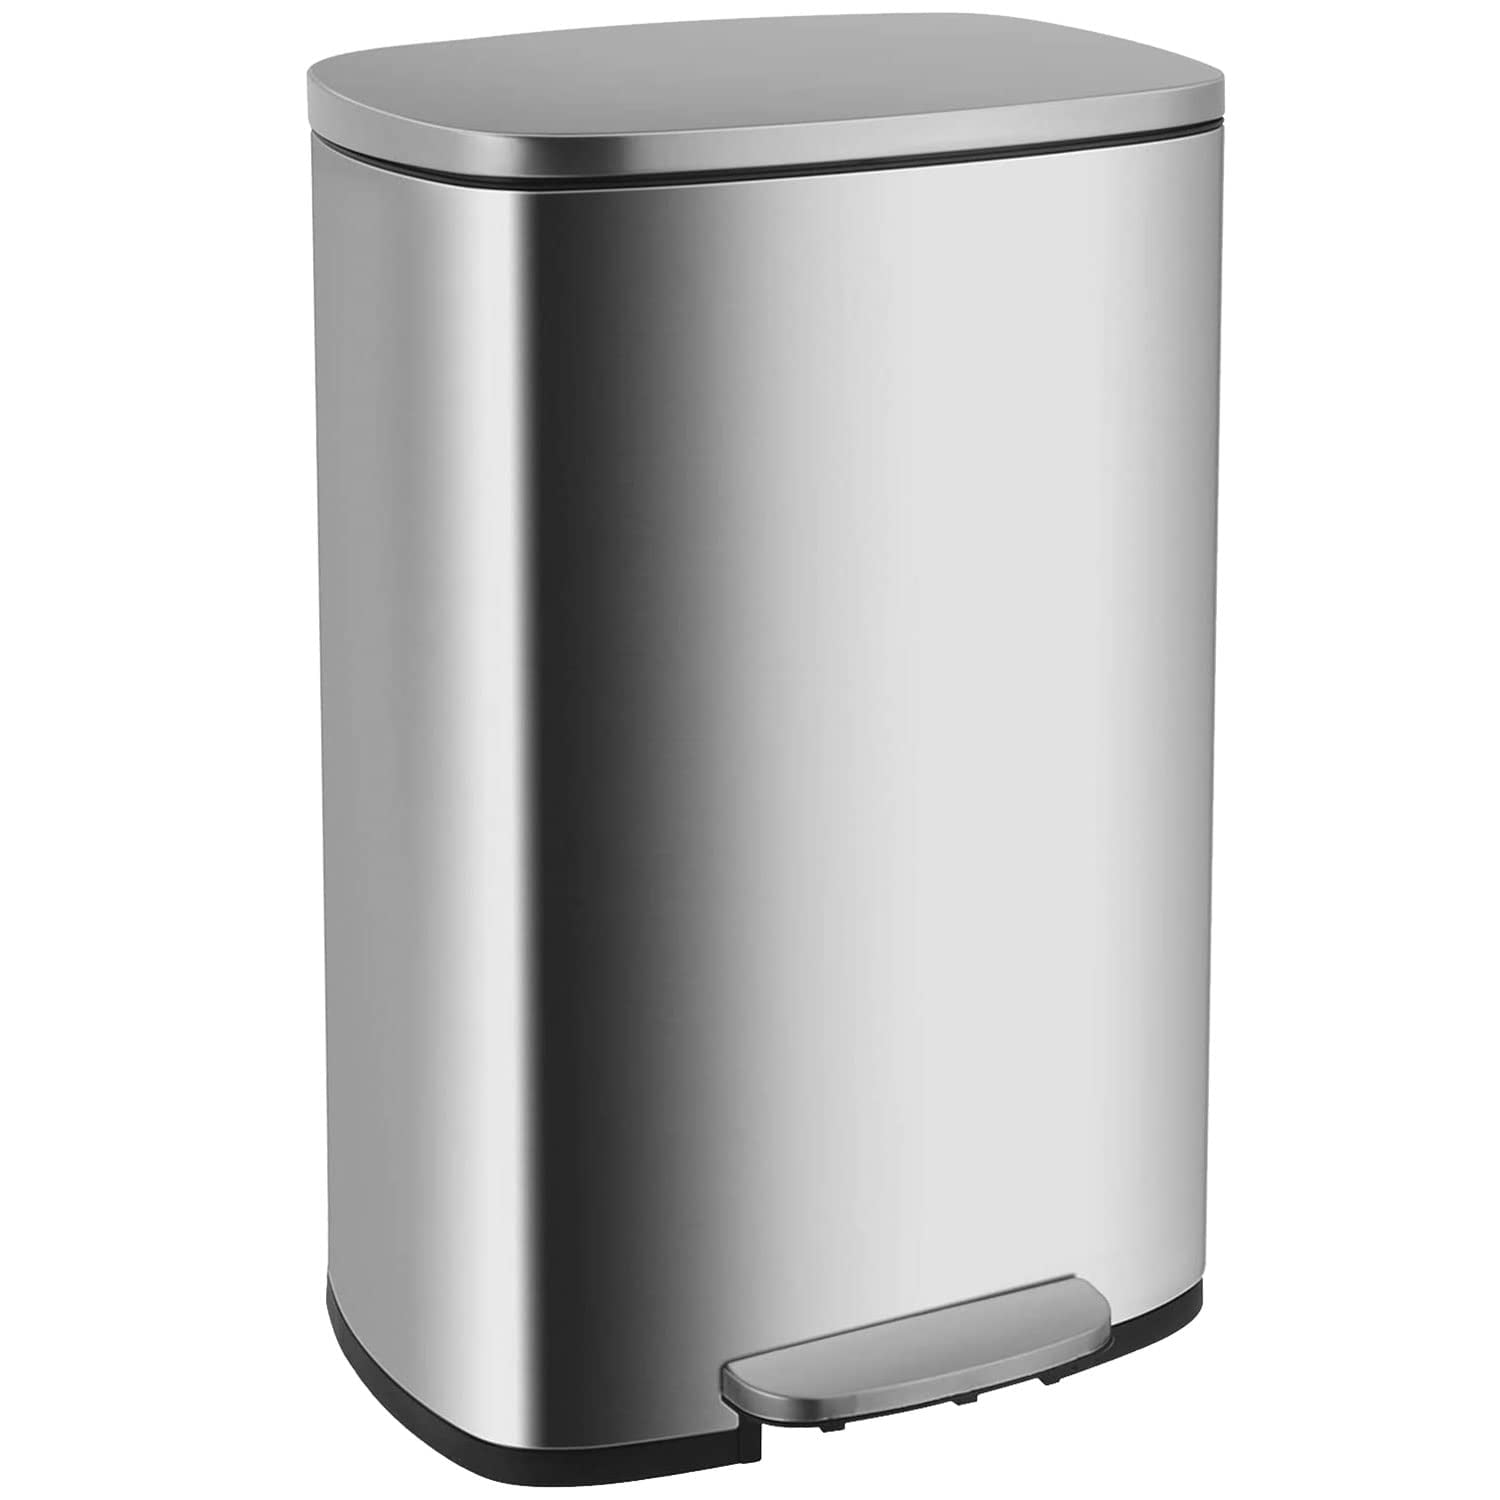 SONGMICS Kitchen Trash Can, Waste Bin, 13-Gallon (50L) Stainless Steel  Garbage Can, with Stay-Open Lid and Step-on Pedal, Soft Closure, Tall,  Large and Space-Saving, White, Silver, Black